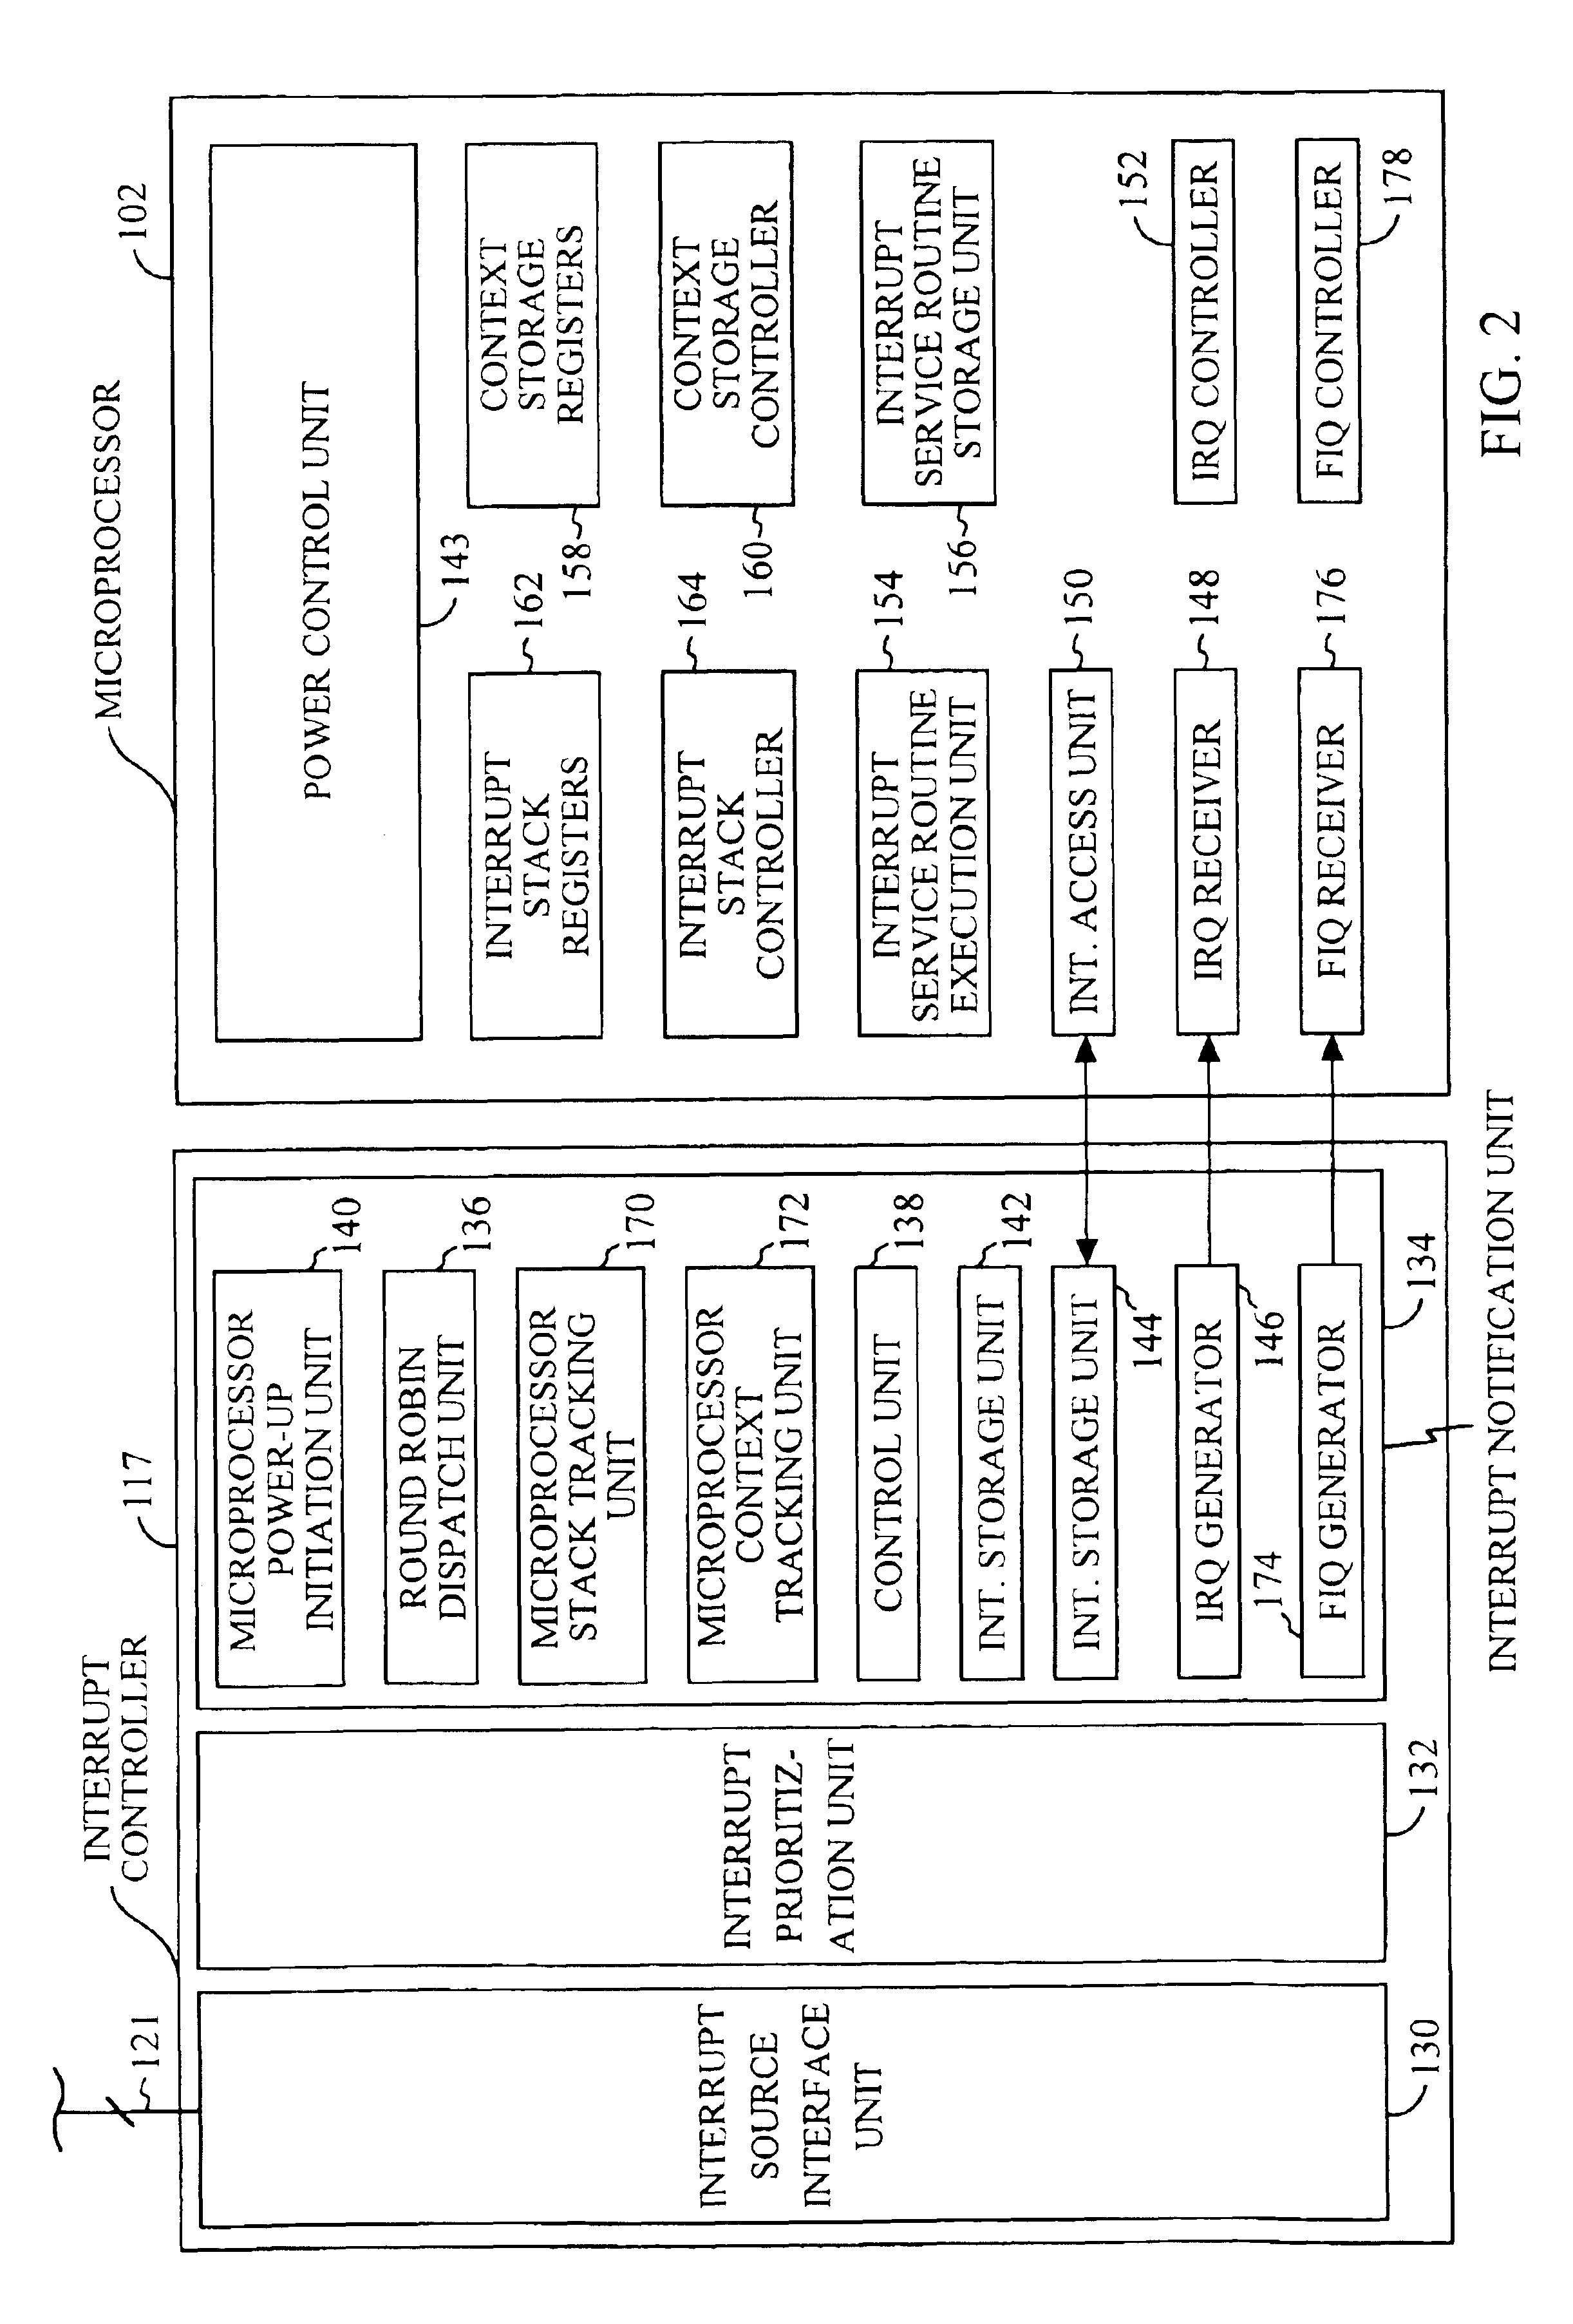 Mobile communication device having a prioritized interrupt controller